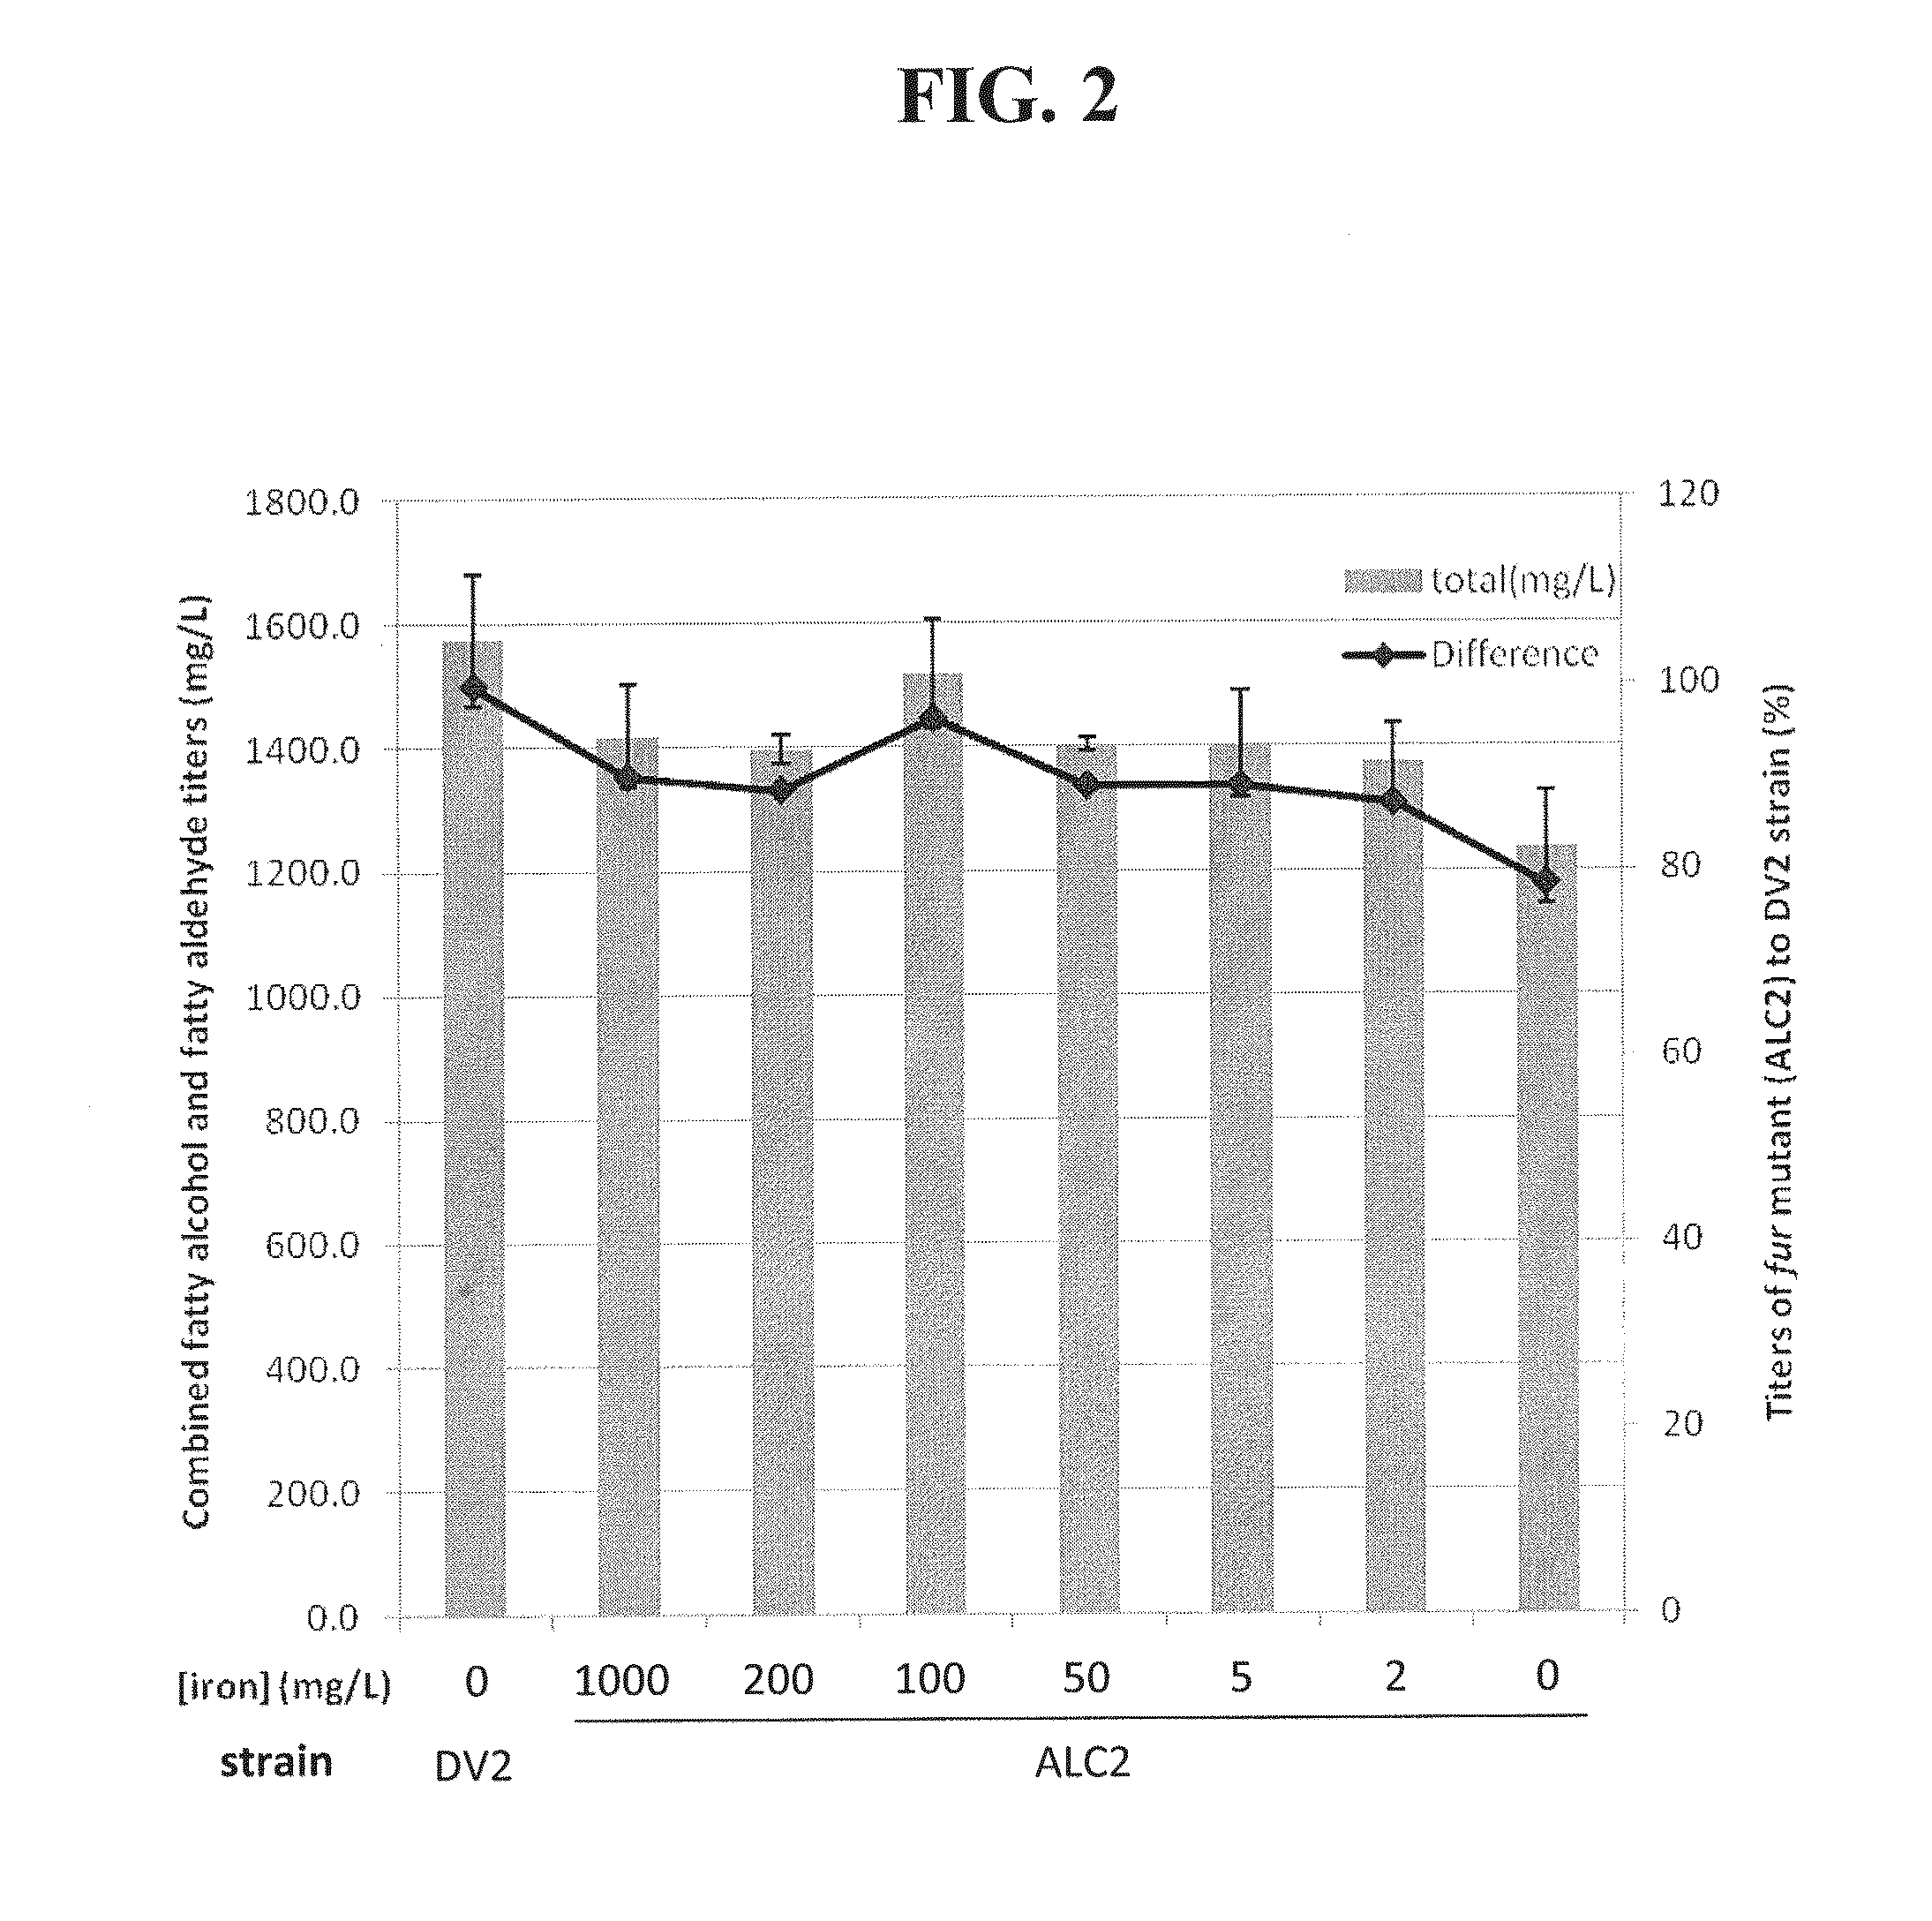 Methods and compositions for enhanced production of fatty aldehydes and fatty alcohols